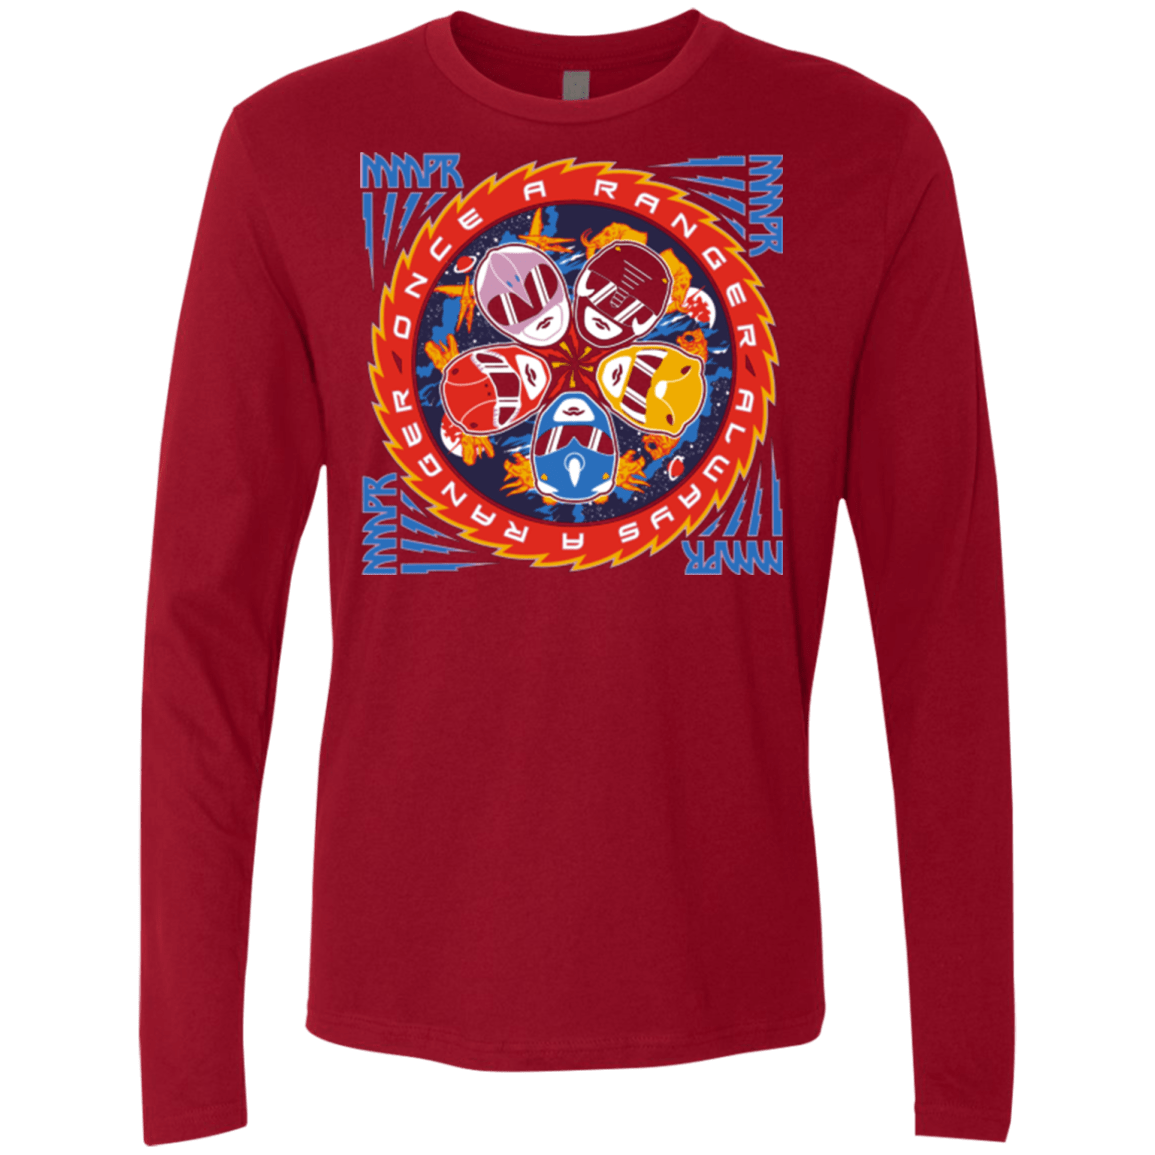 T-Shirts Cardinal / Small Ranger and Roll Over Men's Premium Long Sleeve